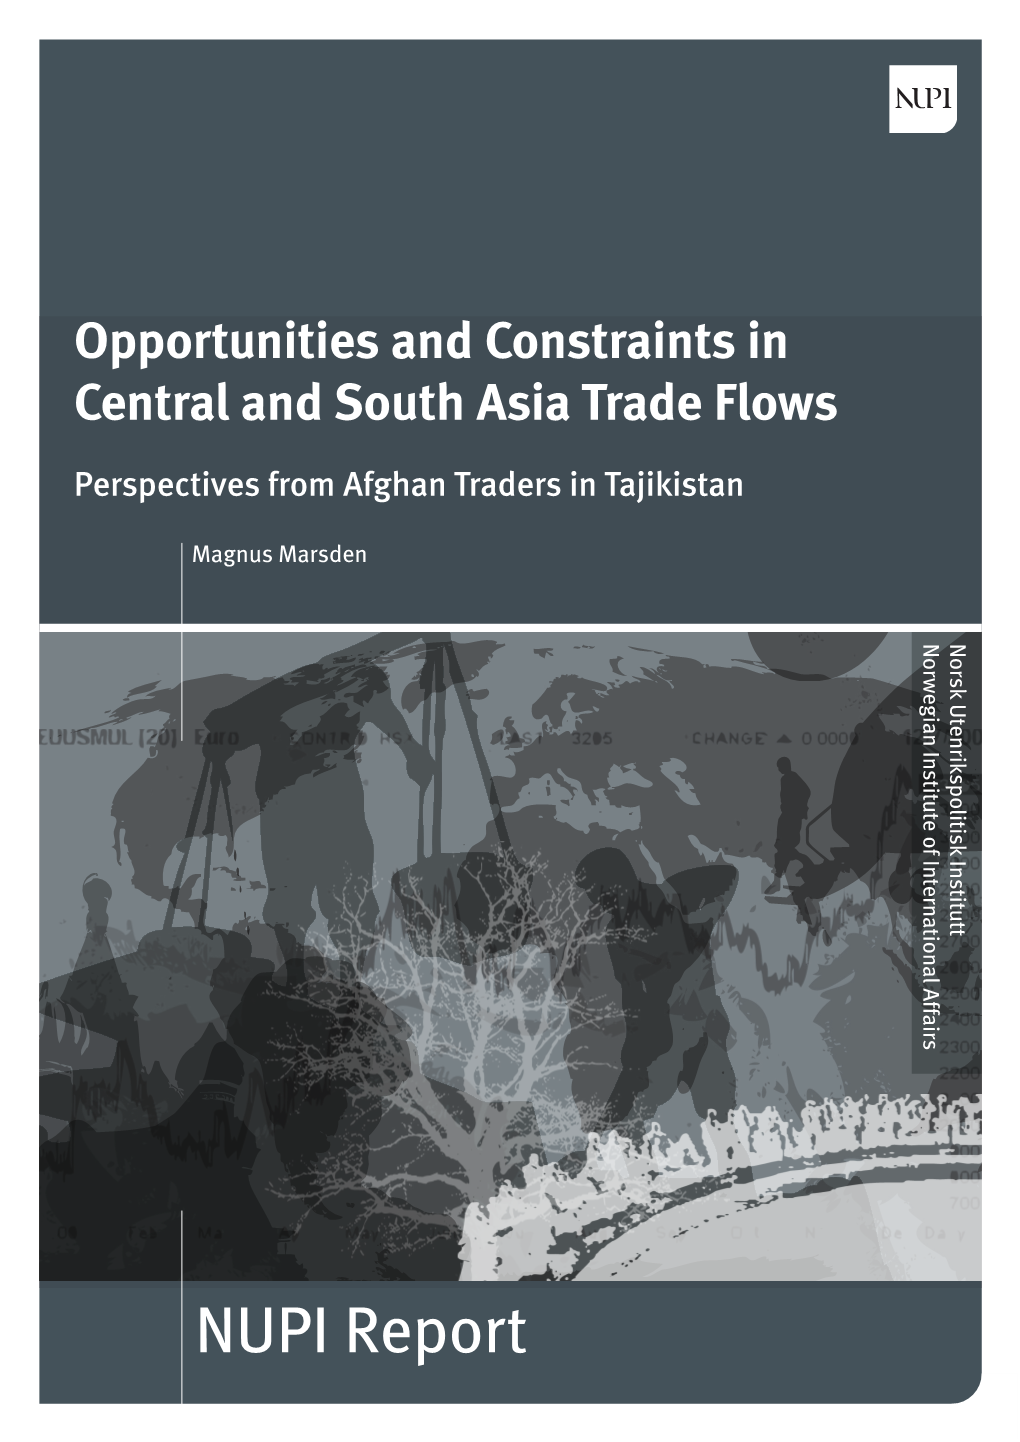 Opportunities and Constraints in Central and South Asia Trade Flows